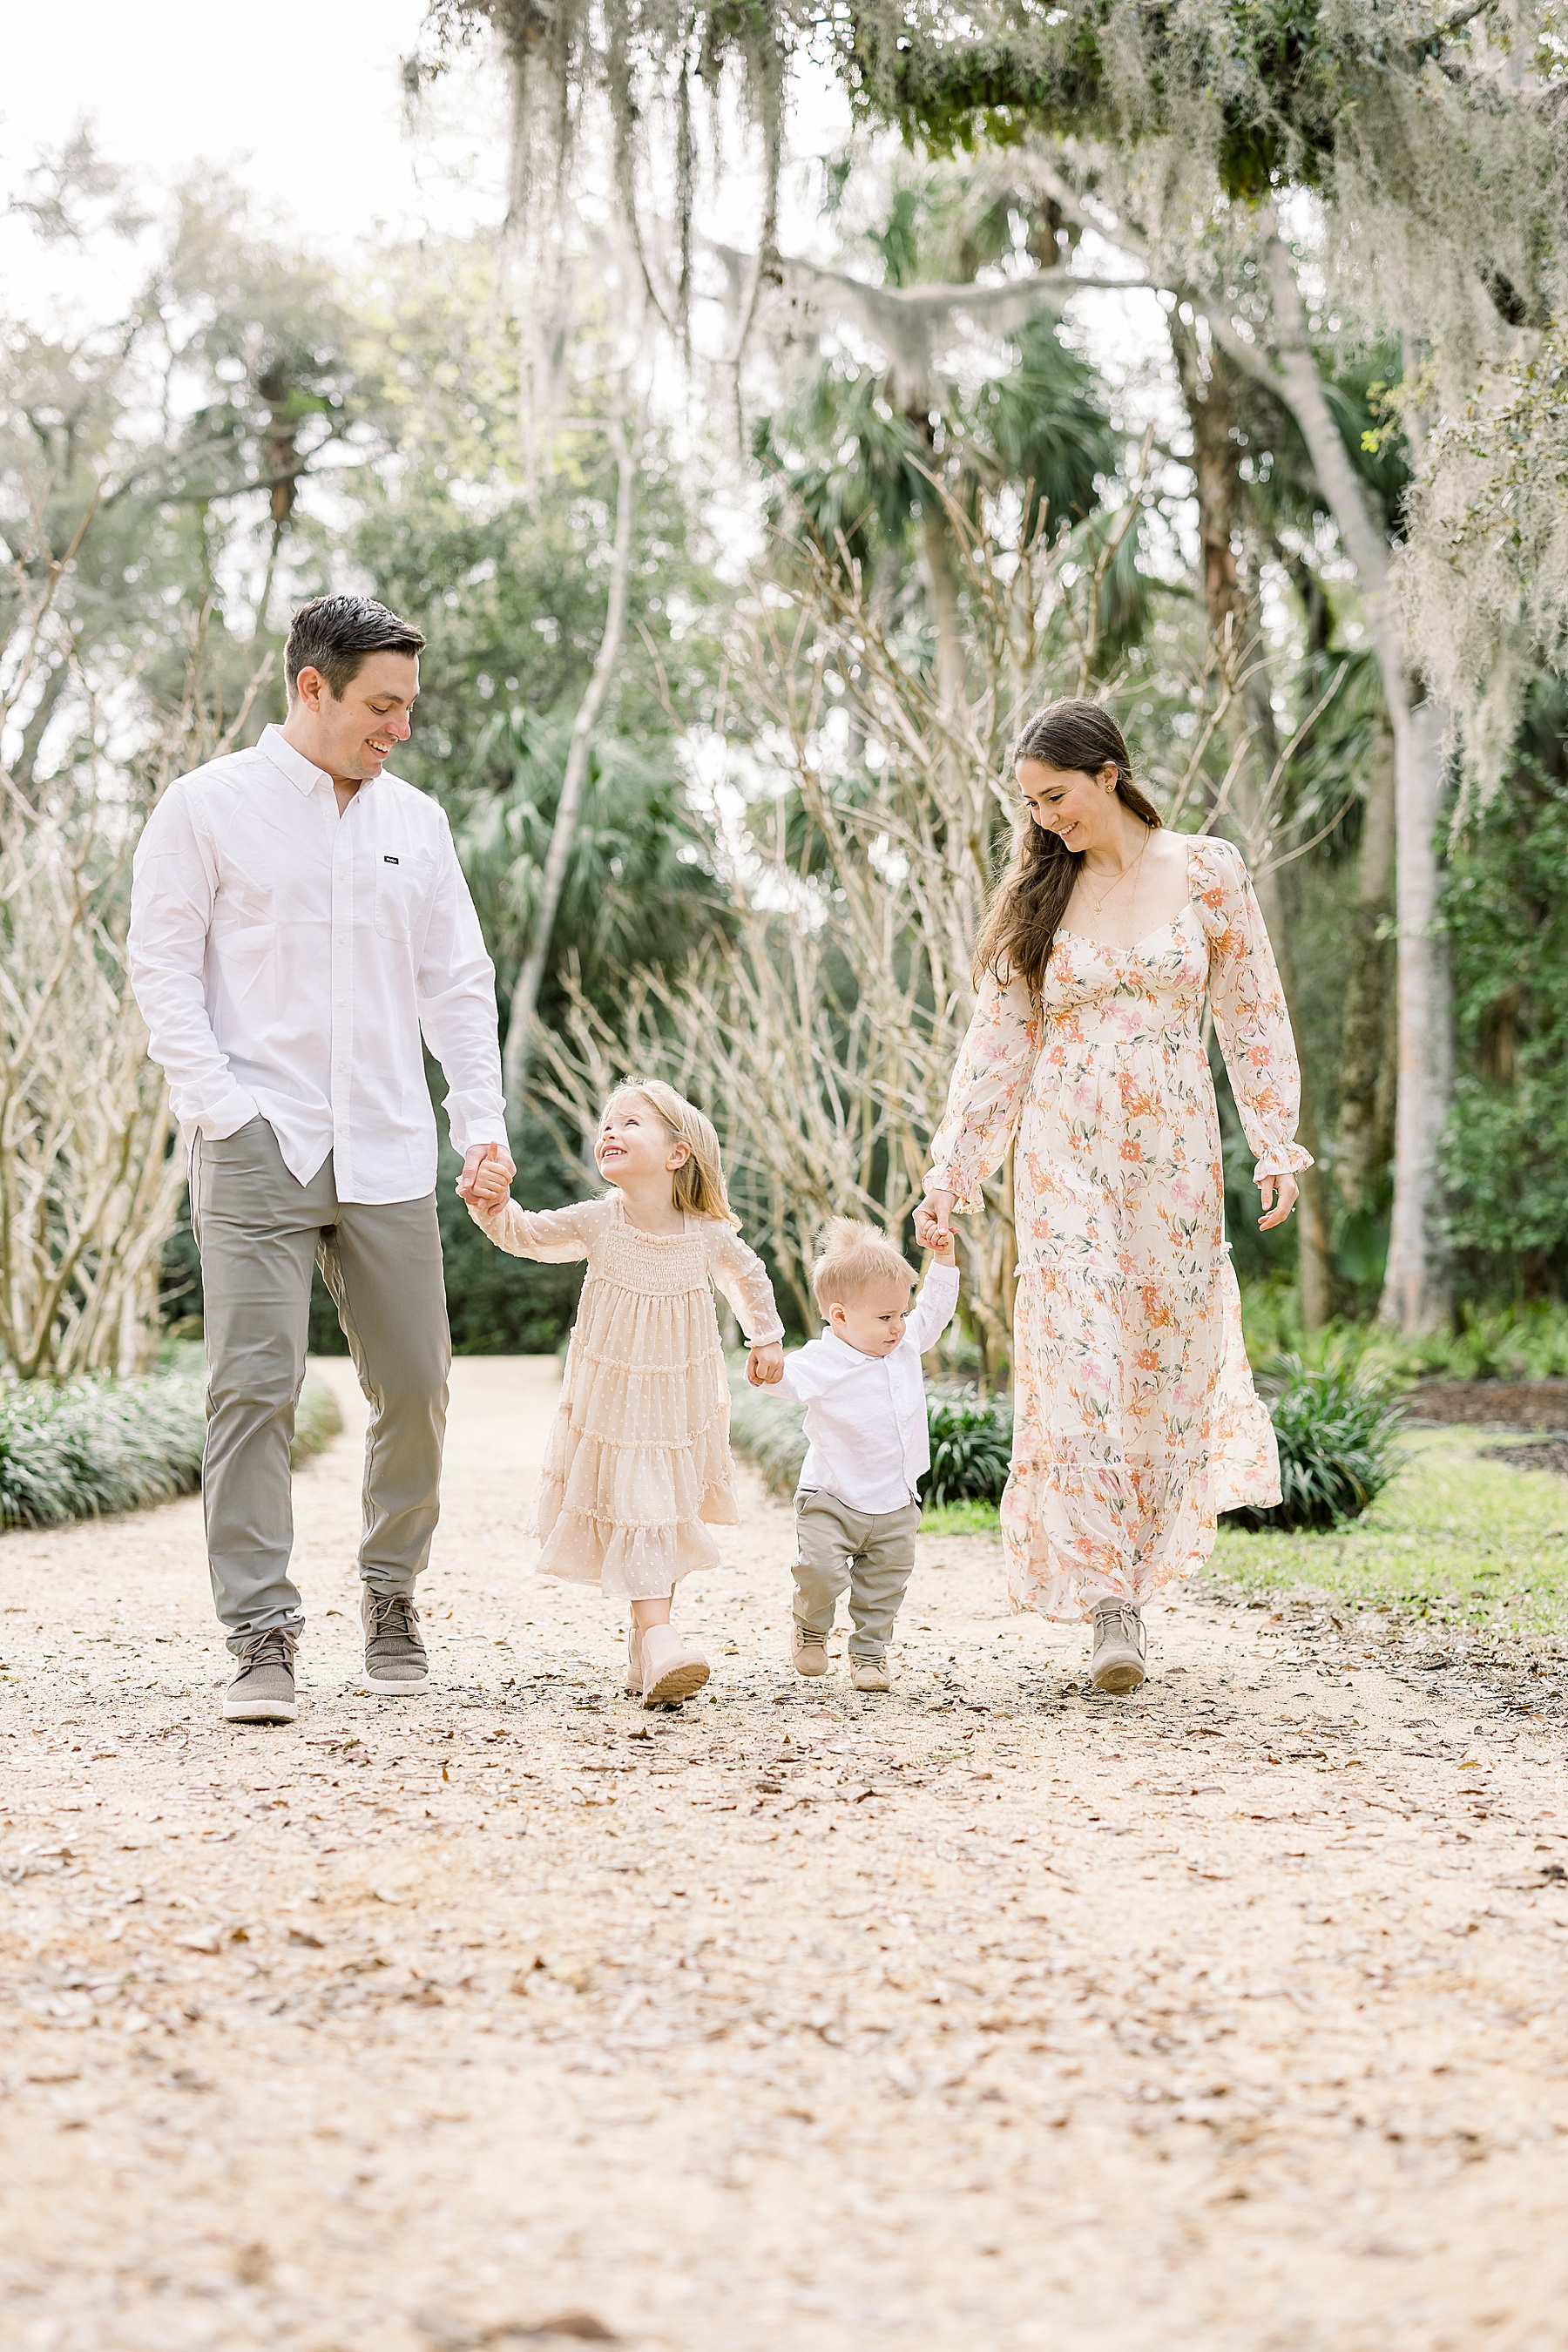 family walking holding hands in the spring at Washington Oaks Gardens State Park